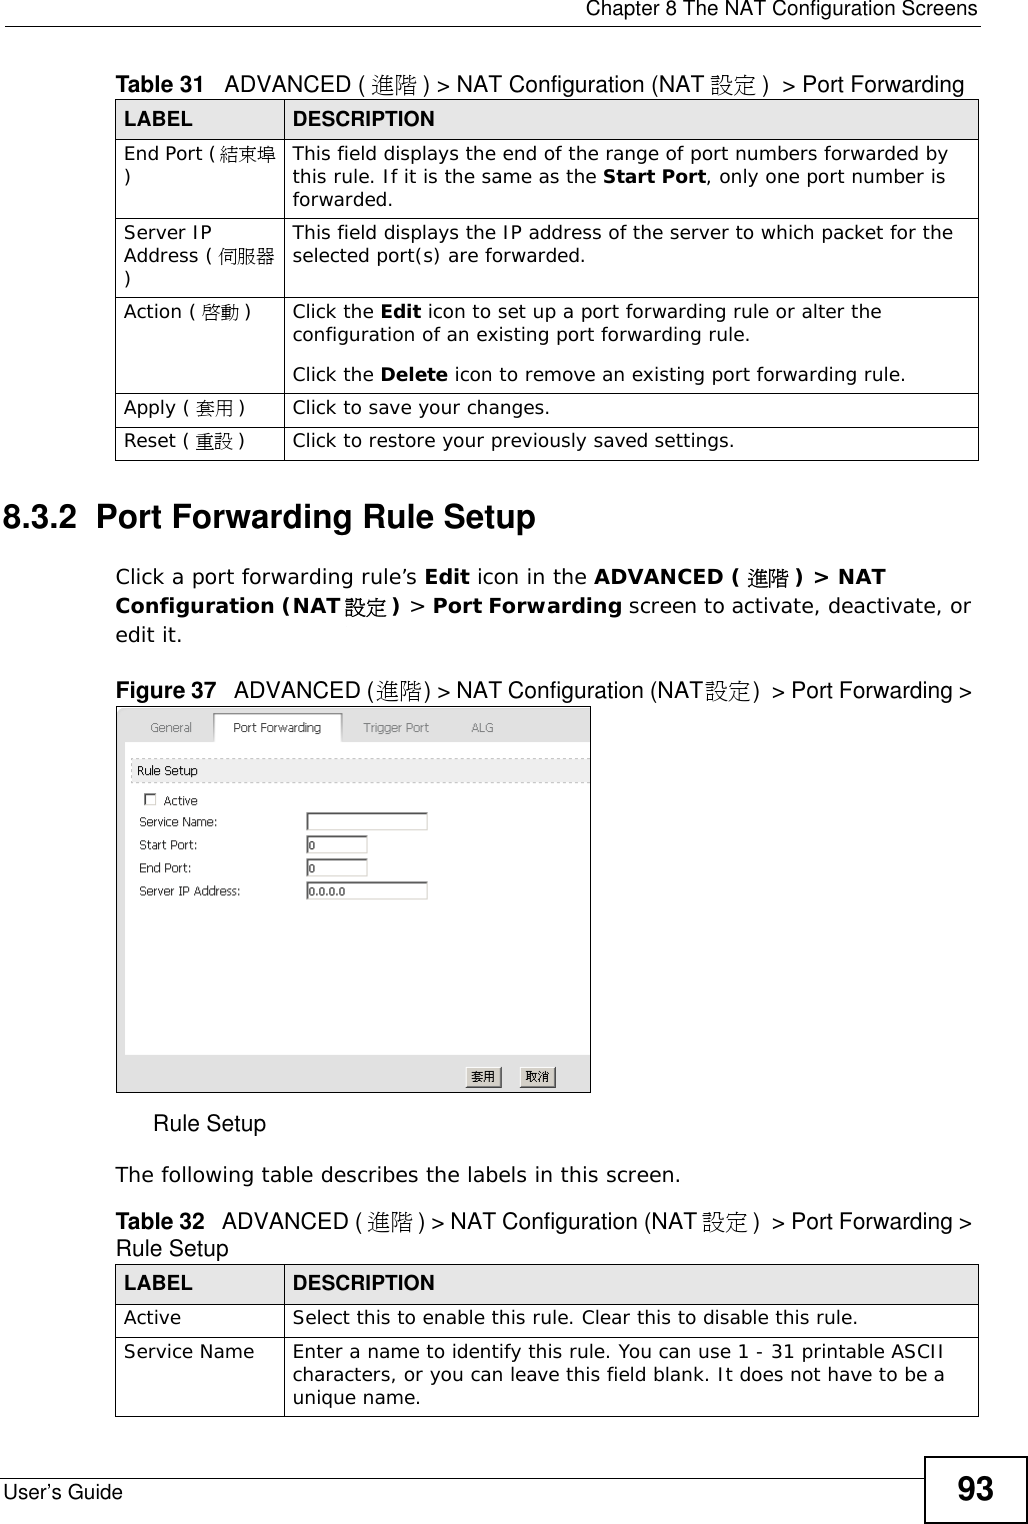  Chapter 8 The NAT Configuration ScreensUser’s Guide 938.3.2  Port Forwarding Rule SetupClick a port forwarding rule’s Edit icon in the ADVANCED ( 進階 ) &gt; NAT Configuration (NAT 設定 ) &gt; Port Forwarding screen to activate, deactivate, or edit it.Figure 37   ADVANCED (進階) &gt; NAT Configuration (NAT設定)  &gt; Port Forwarding &gt; Rule SetupThe following table describes the labels in this screen.End Port (結束埠)This field displays the end of the range of port numbers forwarded by this rule. If it is the same as the Start Port, only one port number is forwarded.Server IP Address ( 伺服器)This field displays the IP address of the server to which packet for the selected port(s) are forwarded.Action ( 啟動 ) Click the Edit icon to set up a port forwarding rule or alter the configuration of an existing port forwarding rule.Click the Delete icon to remove an existing port forwarding rule. Apply ( 套用 )Click to save your changes.Reset ( 重設 )Click to restore your previously saved settings.Table 31   ADVANCED ( 進階 ) &gt; NAT Configuration (NAT 設定 )  &gt; Port Forwarding LABEL DESCRIPTIONTable 32   ADVANCED ( 進階 ) &gt; NAT Configuration (NAT 設定 )  &gt; Port Forwarding &gt; Rule SetupLABEL DESCRIPTIONActive Select this to enable this rule. Clear this to disable this rule.Service Name Enter a name to identify this rule. You can use 1 - 31 printable ASCII characters, or you can leave this field blank. It does not have to be a unique name.